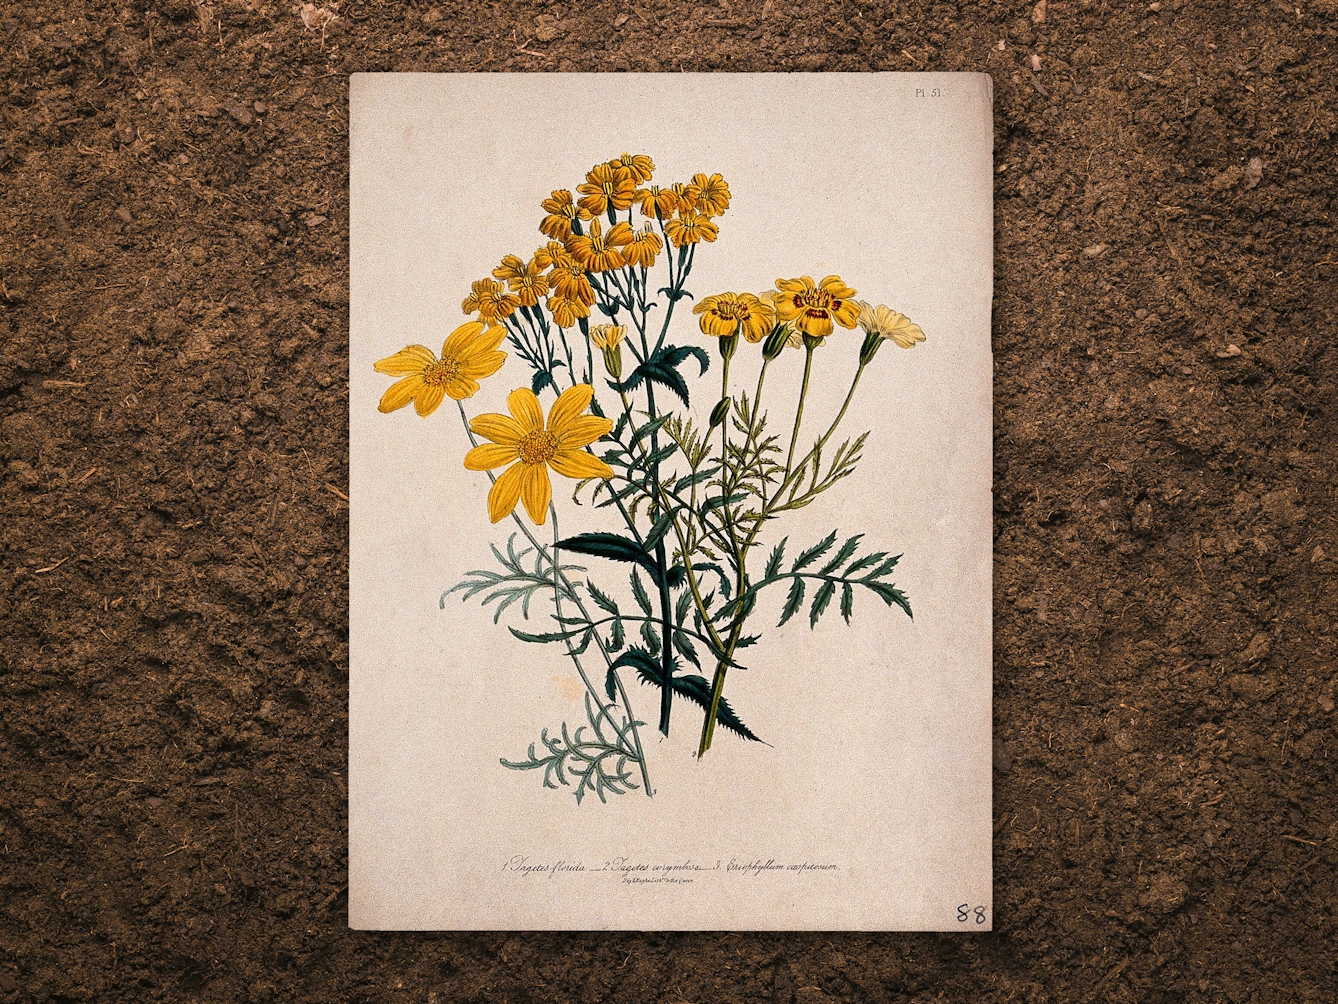 Digital composite image of a botanical drawing resting slightly above a brown earth background, casting a subtle shadow. The drawing shows three ornamental yellow flowers, including a French marigold.